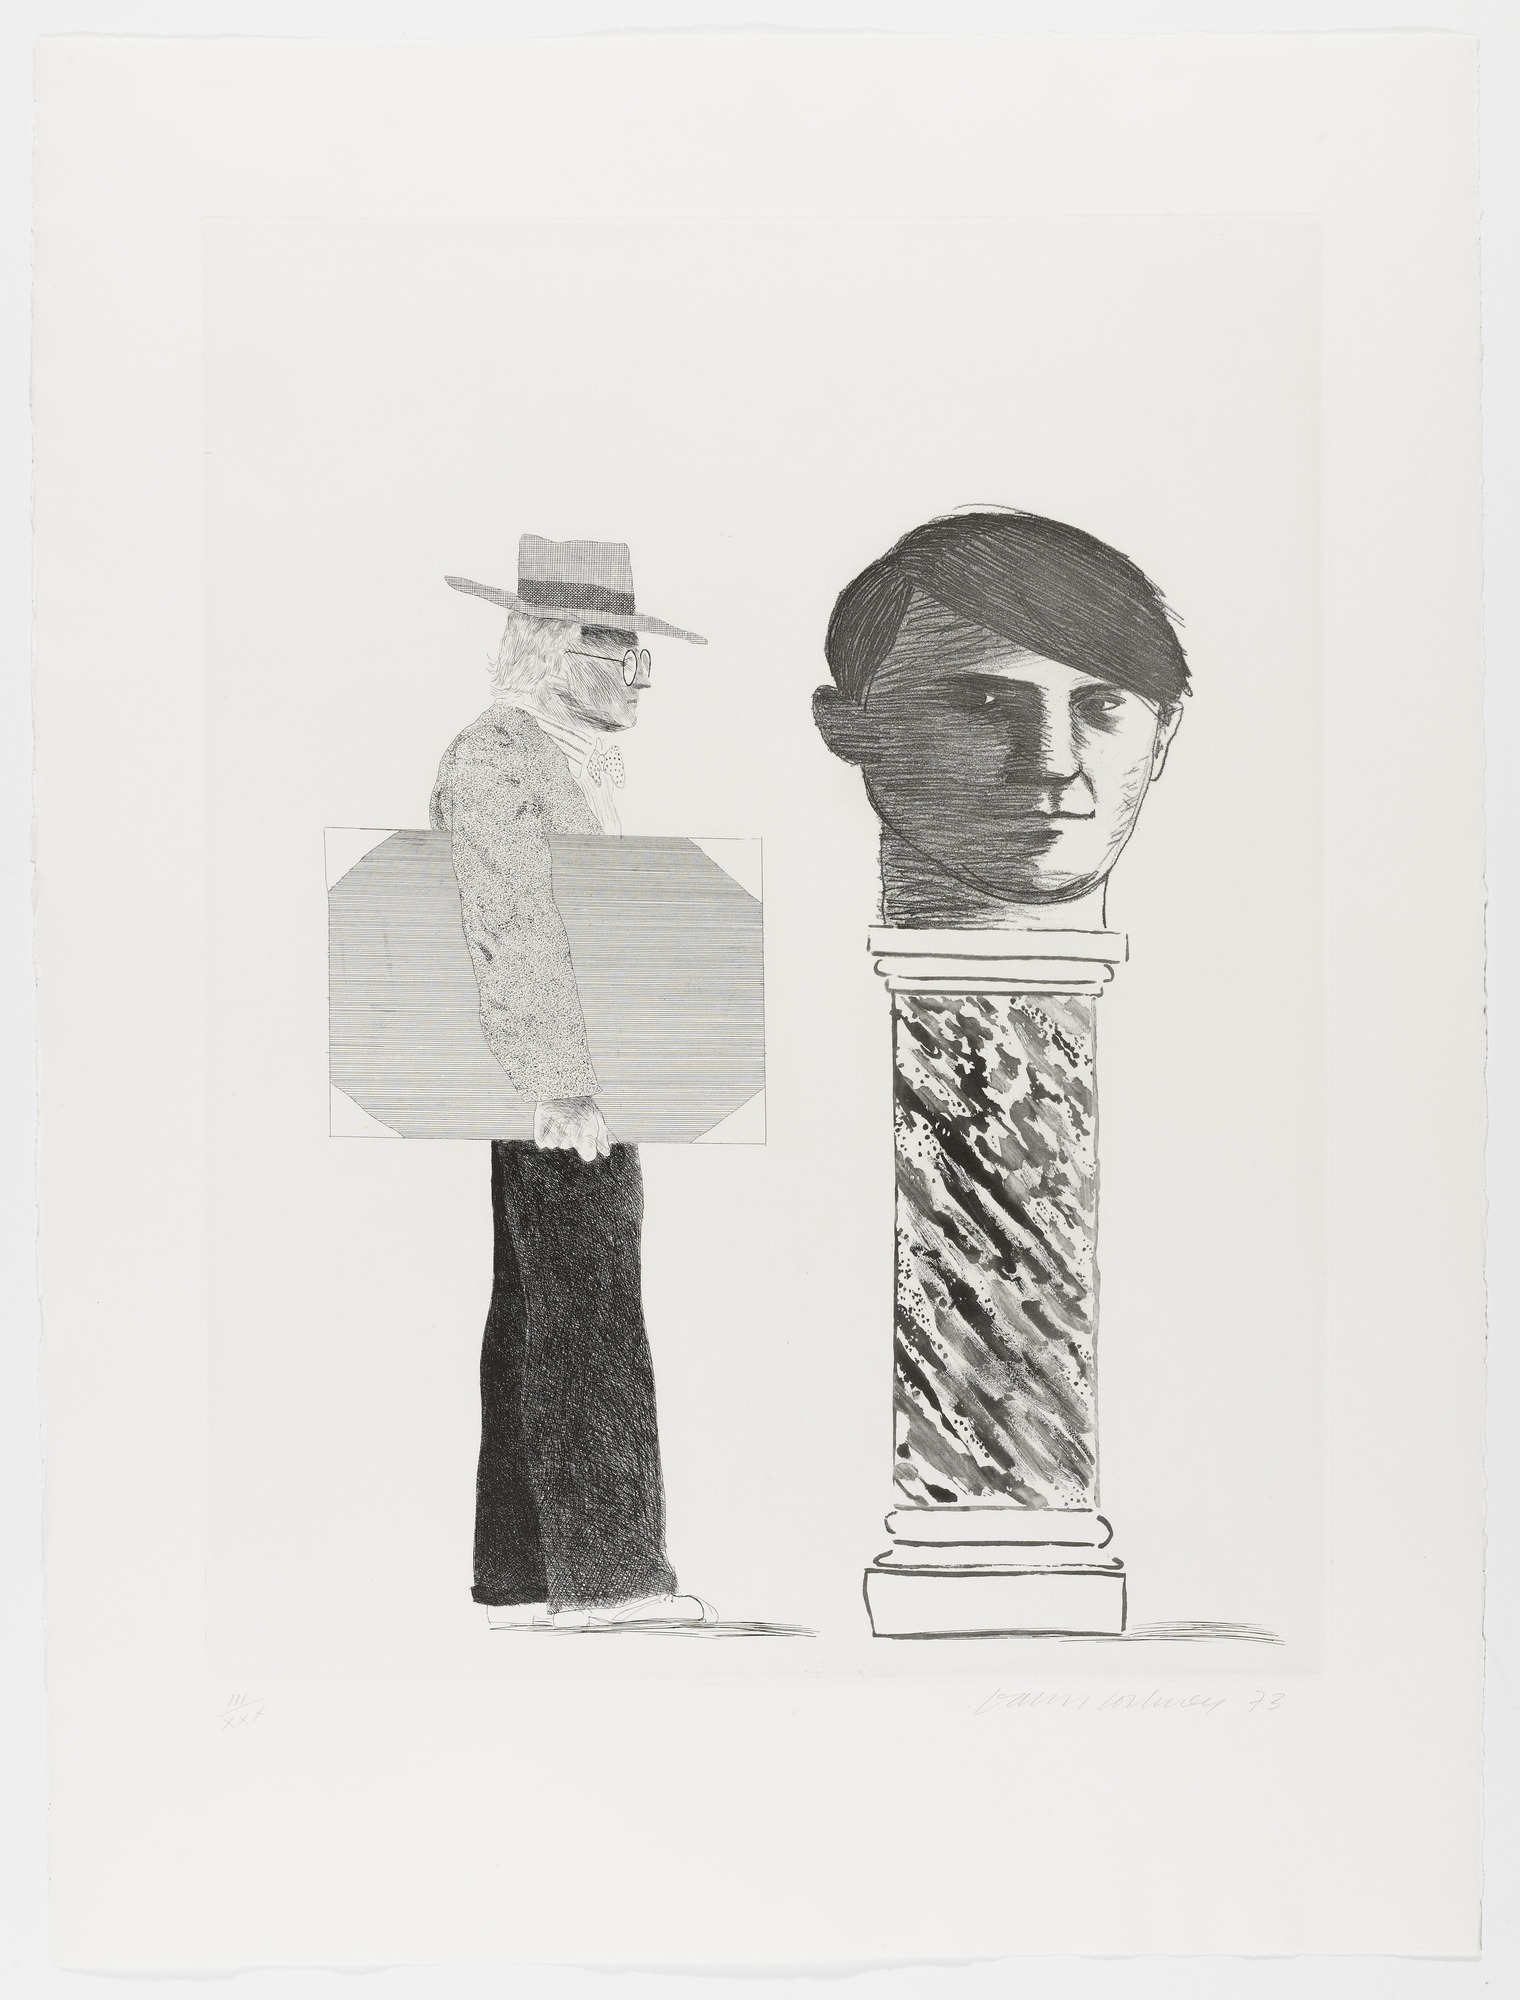 David Hockney, The Student - Homage to Picasso, 1973.jpg